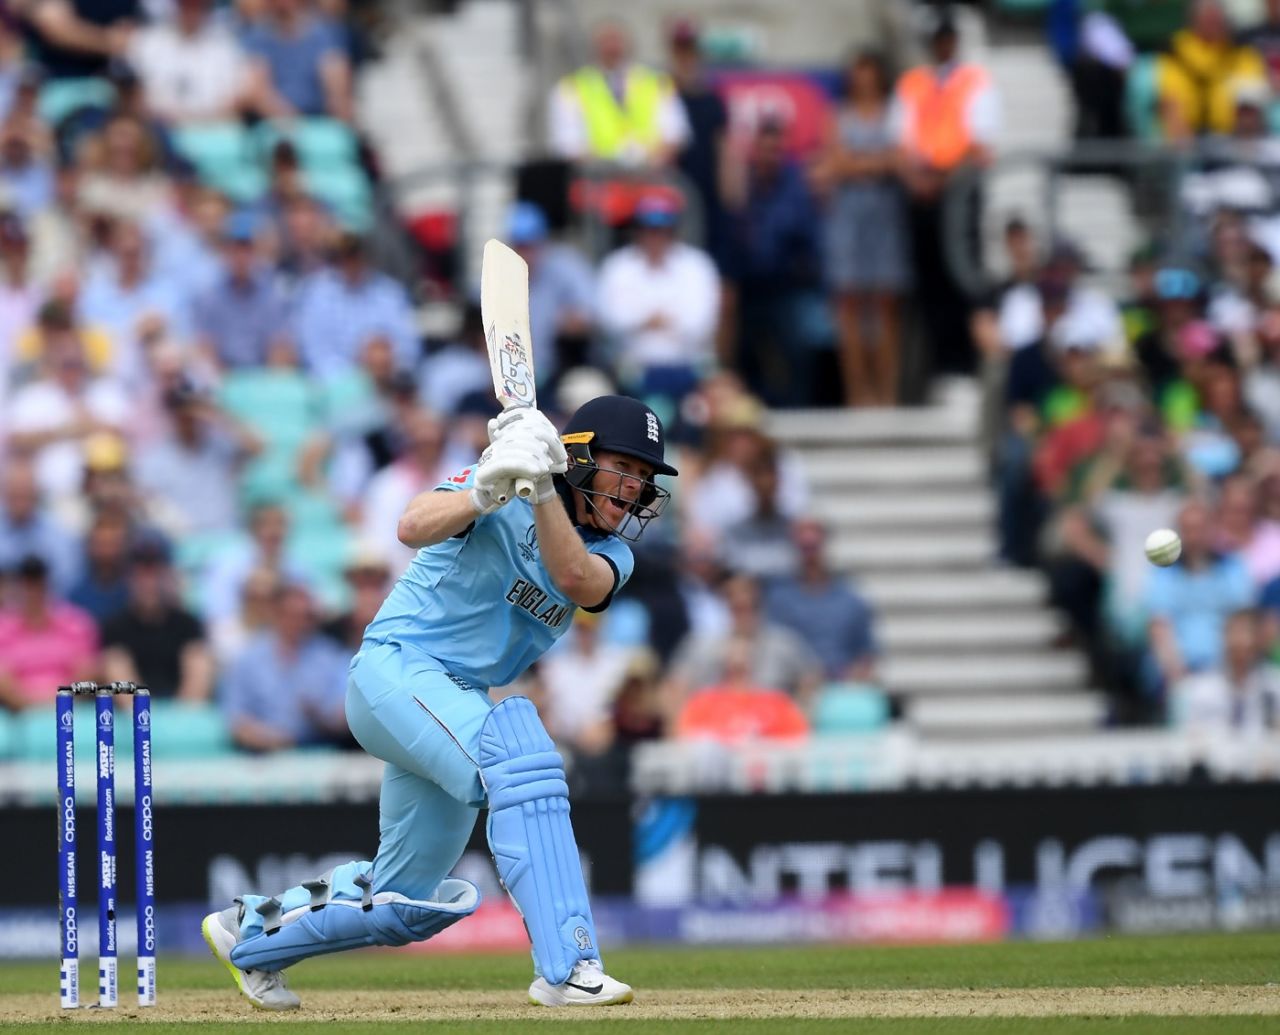 Eoin Morgan maintained England's momentum after the wickets of Jason Roy and Joe Root, England v South Africa, World Cup 2019, The Oval, May 30, 2019